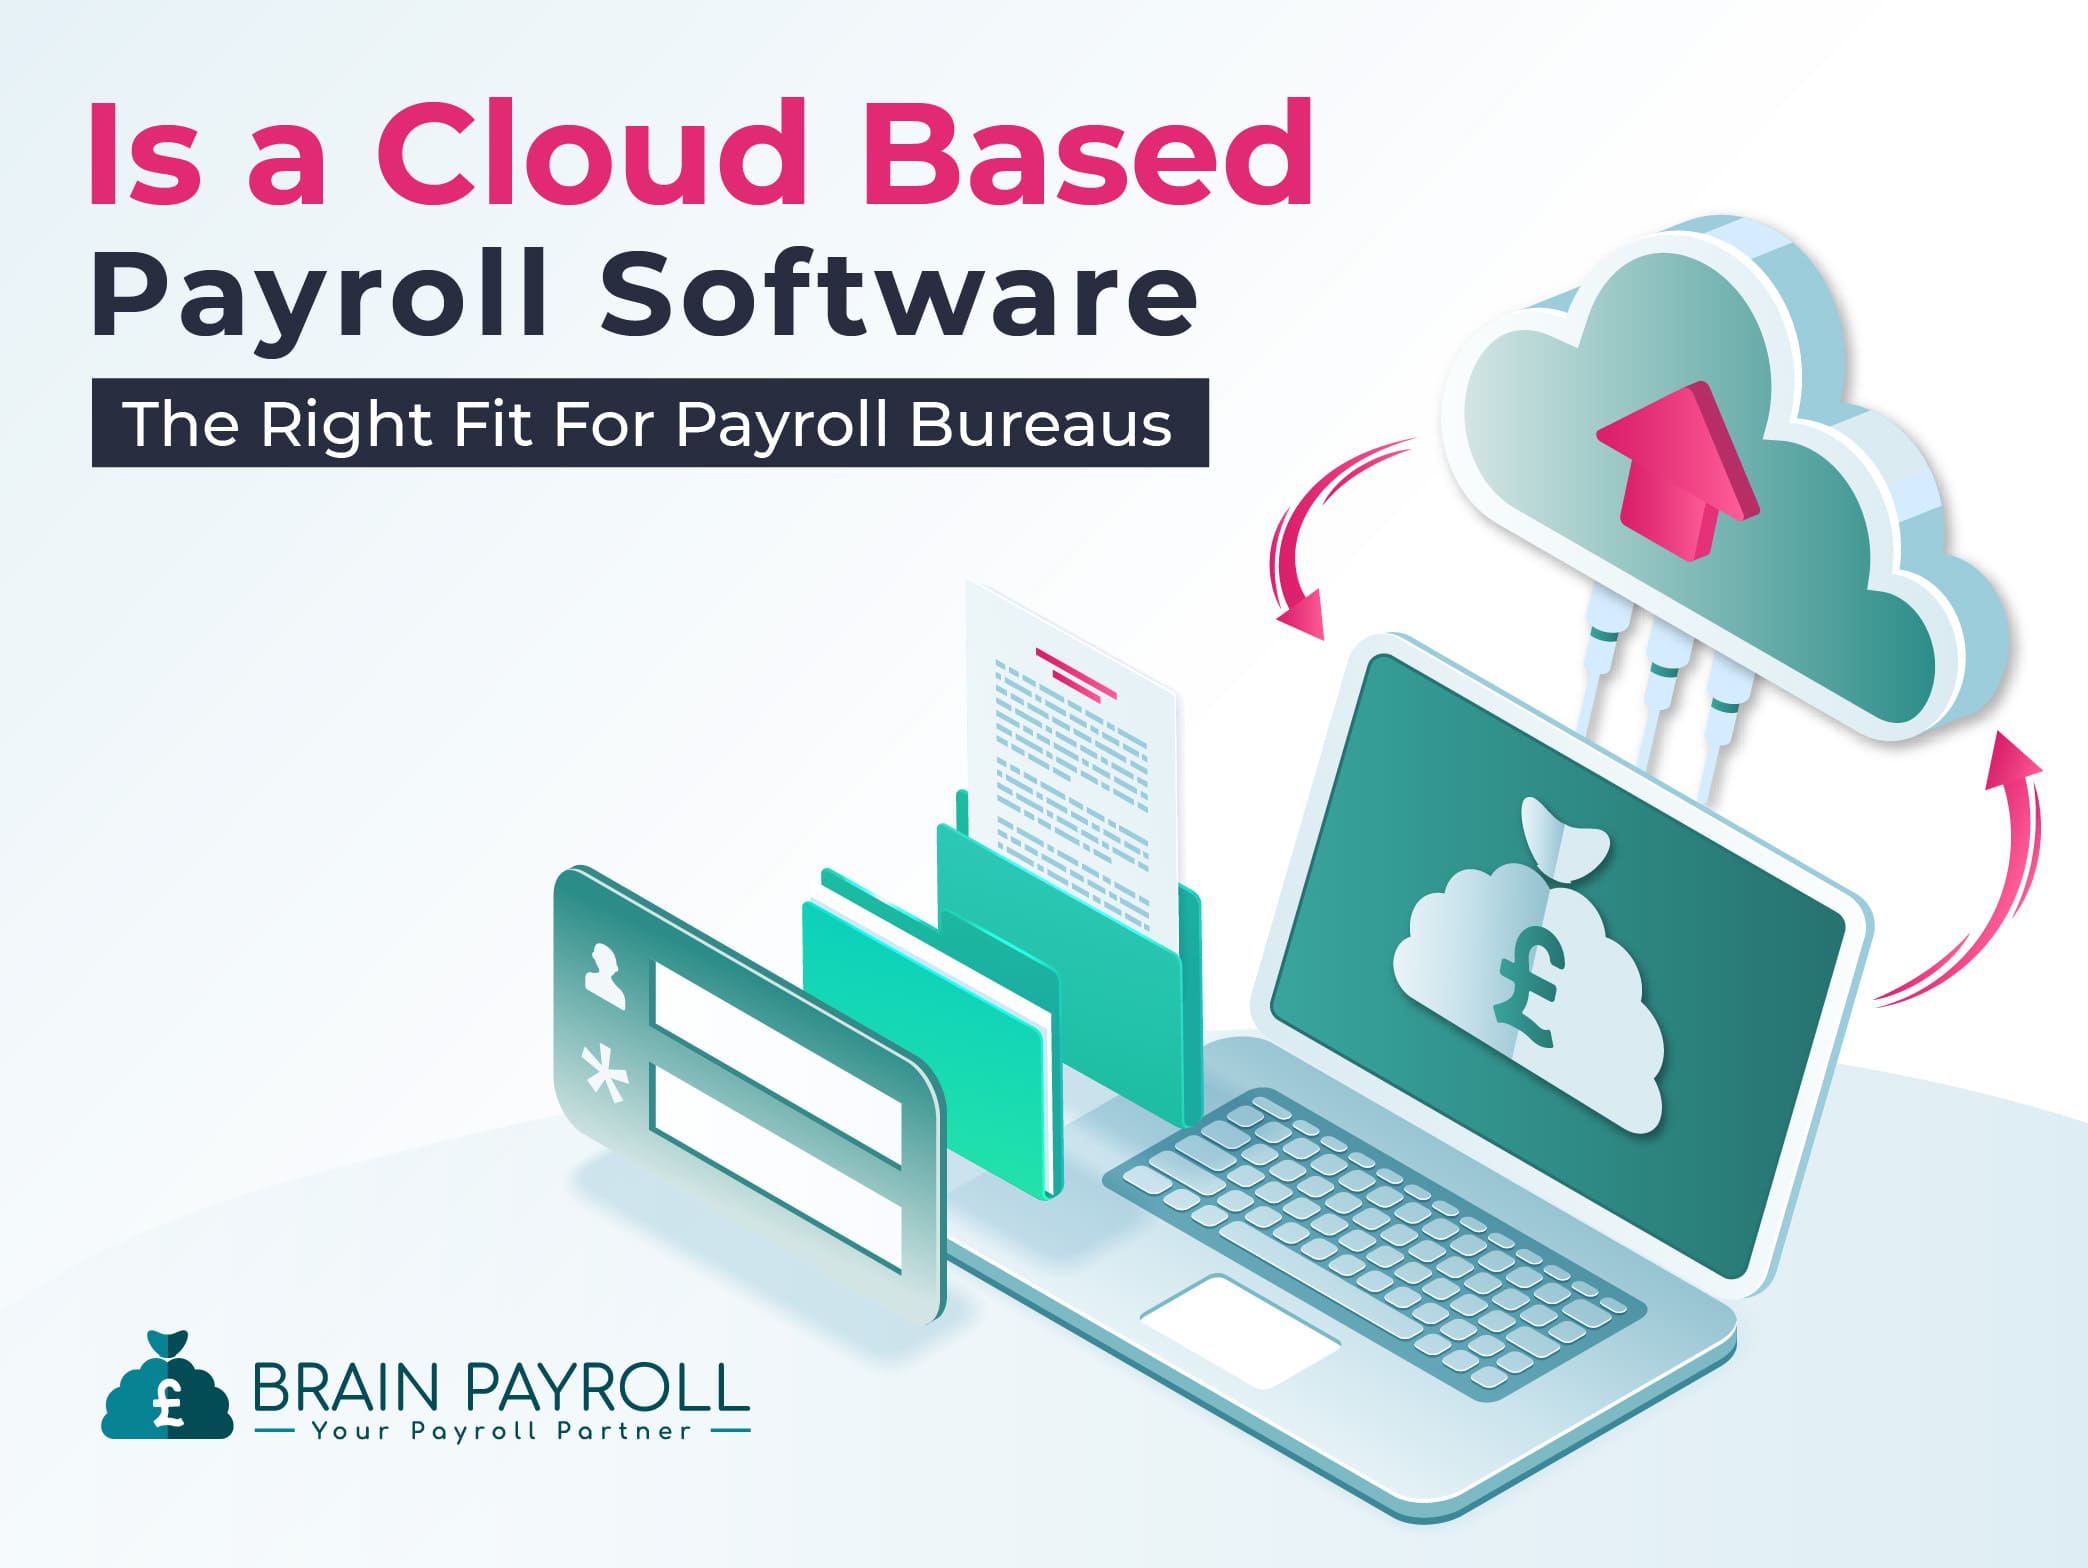 Is a Cloud Based Payroll Software The Right Fit For Payroll Bureaus